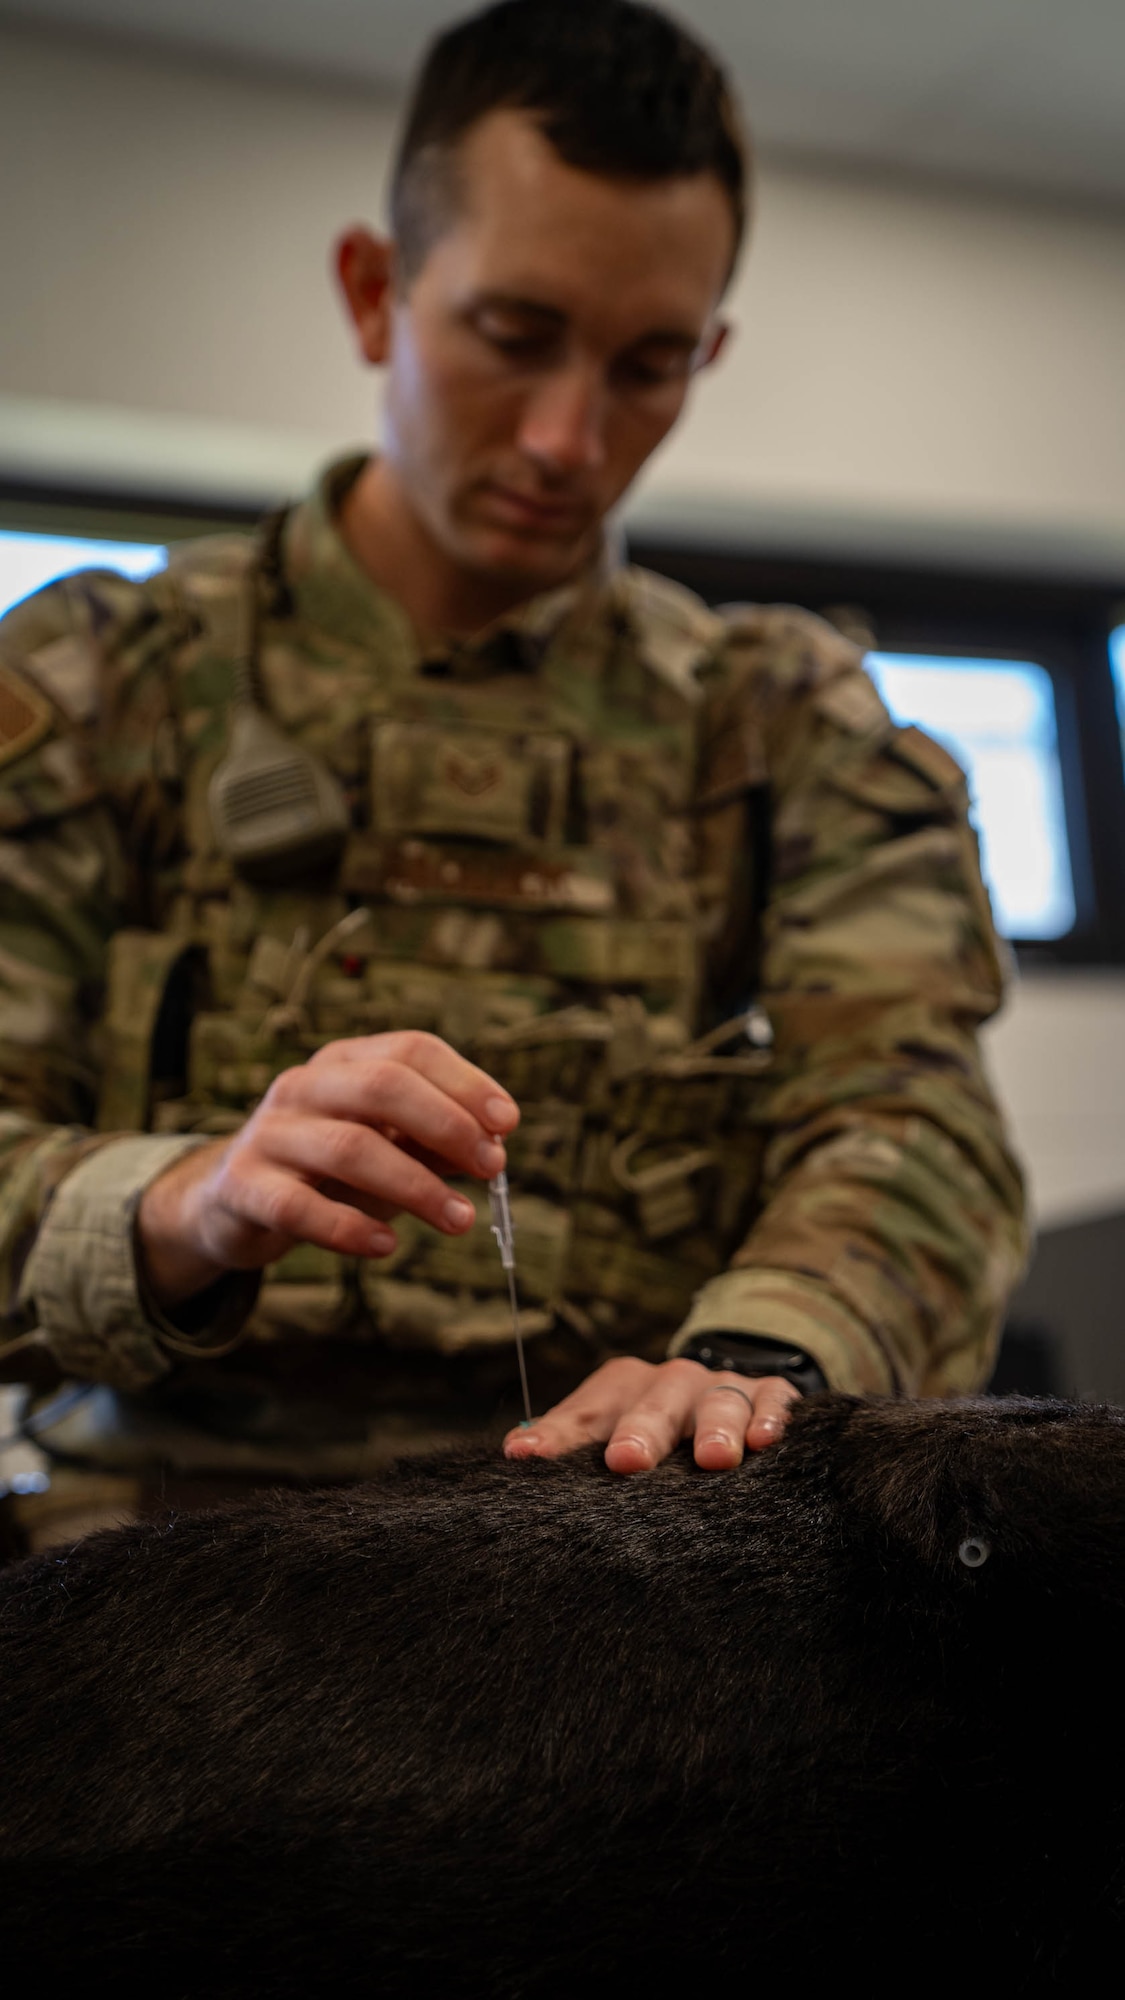 U.S. Air Force Staff Sgt. Dustin Hadsock, 81st Security Forces Squadron military working dog handler, practices canine emergency medical procedures using Advanced Canine Medical Trainer K-9 Diesel at Keesler Air Force Base, Mississippi, Oct. 20, 2023.